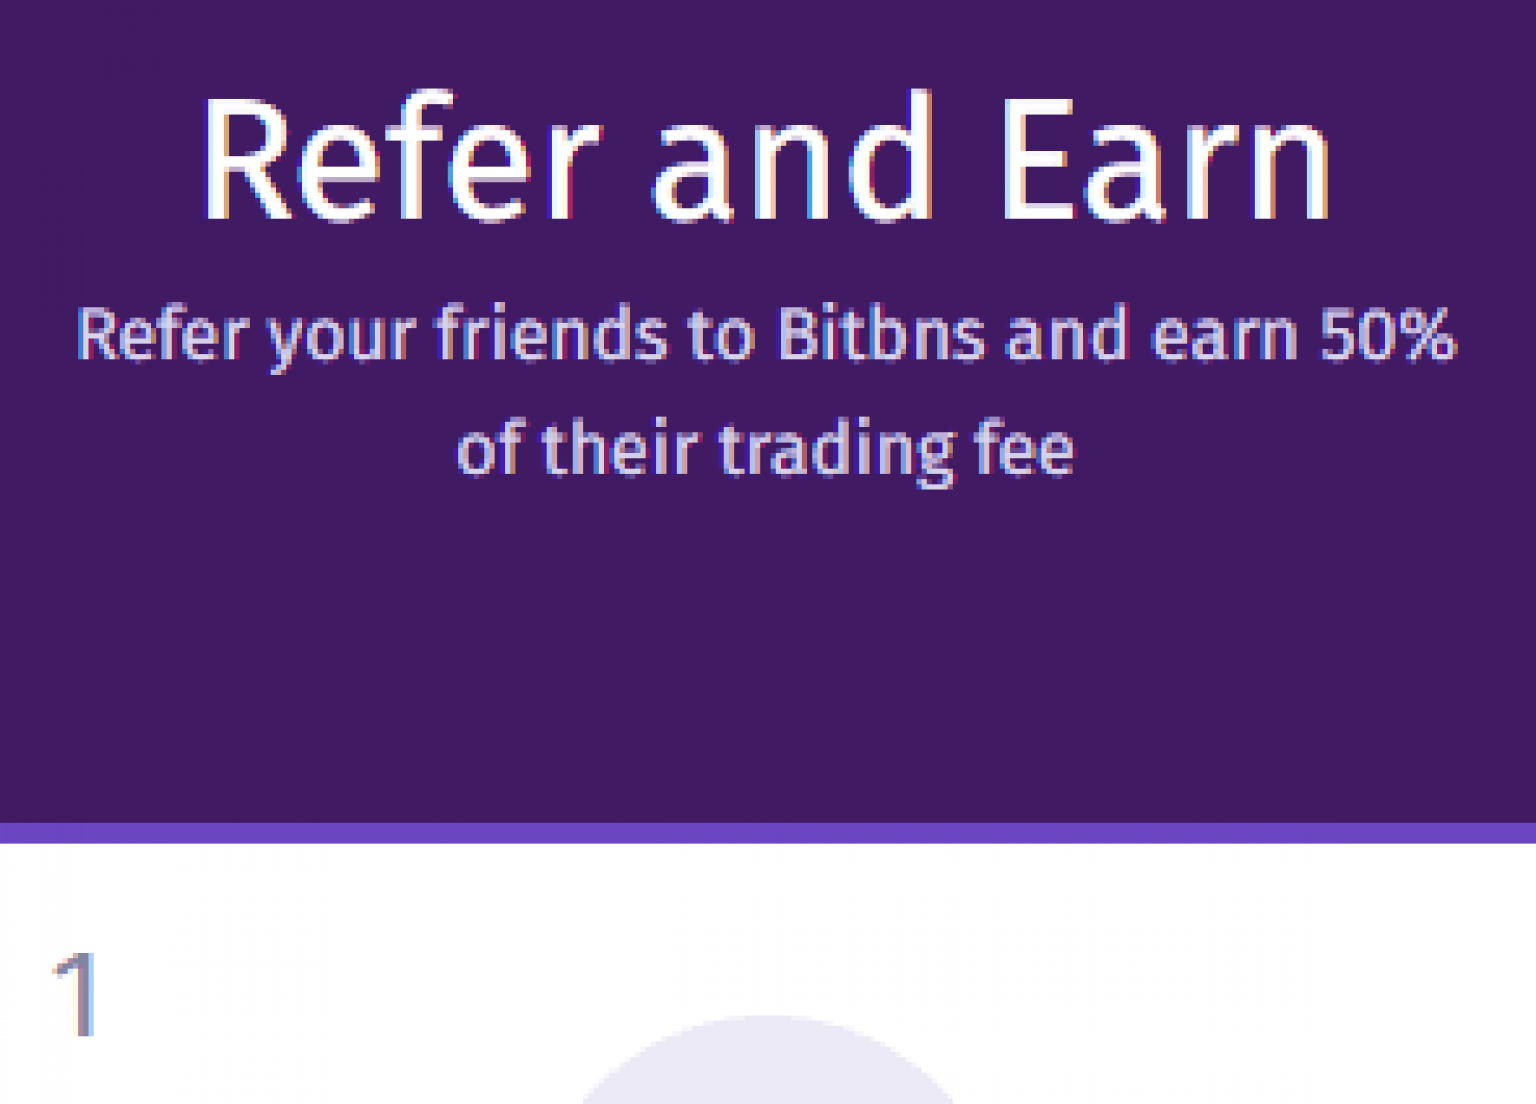 Bitbns App: Get Bitcoin Up to Rs 100 on Signup | Referral Code